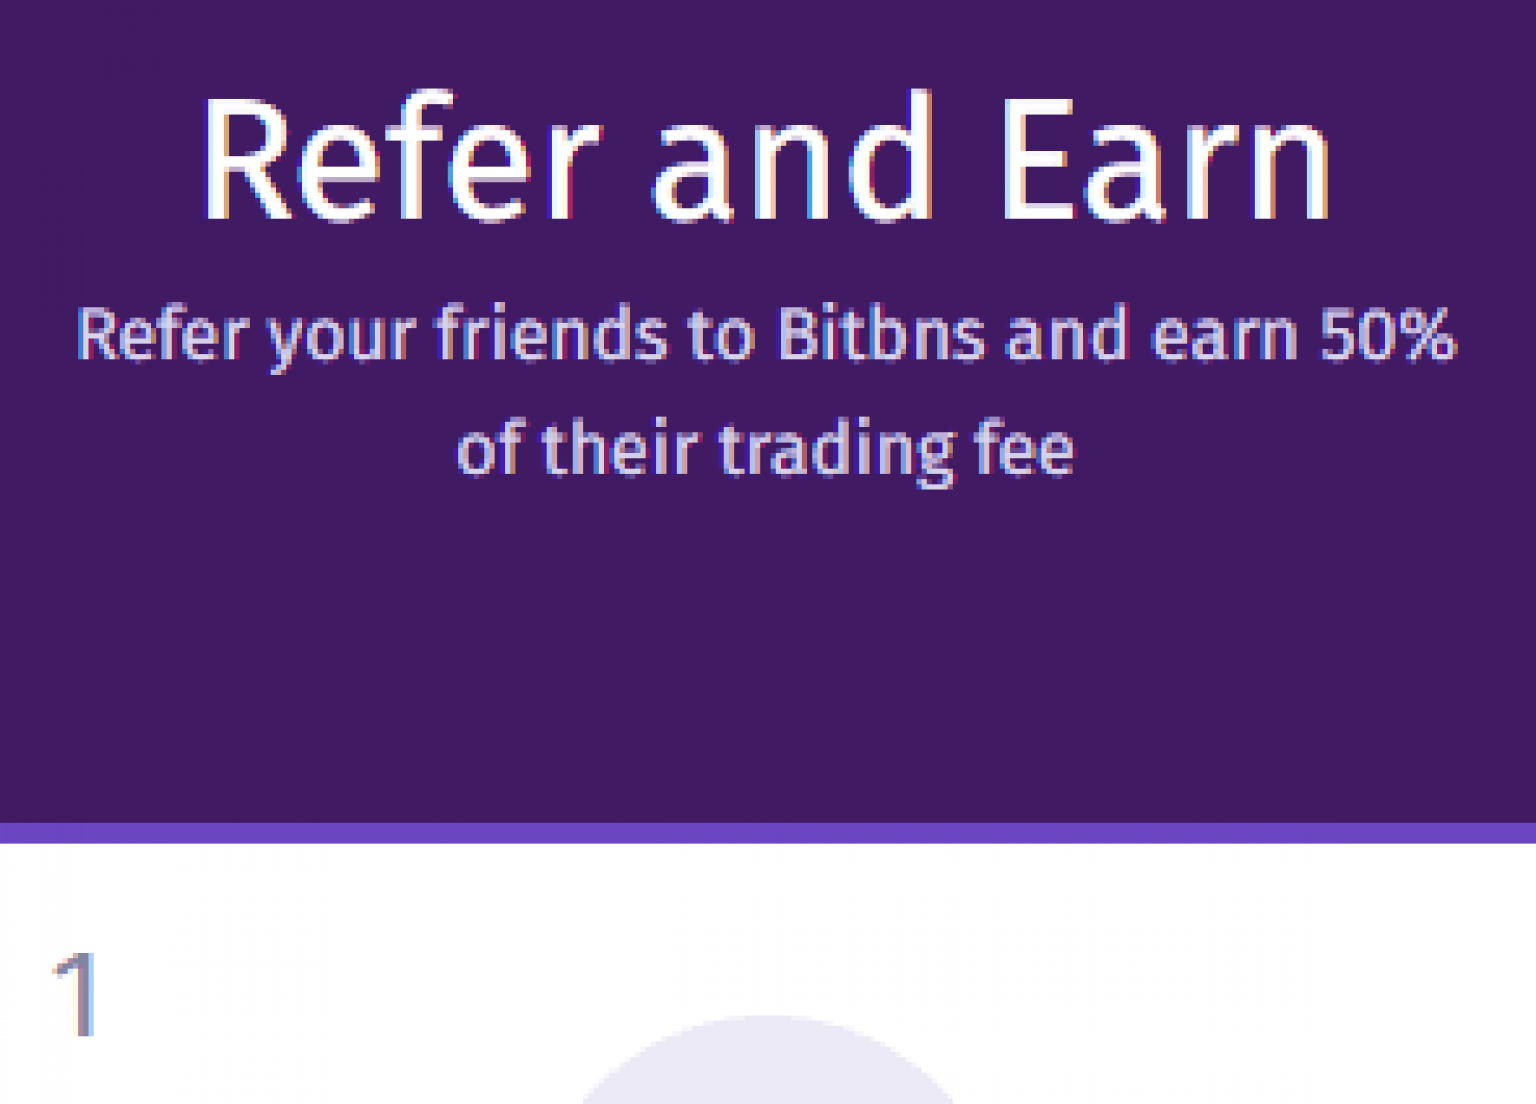 Bitbns App: Get Bitcoin Up to Rs 100 on Signup | Referral Code